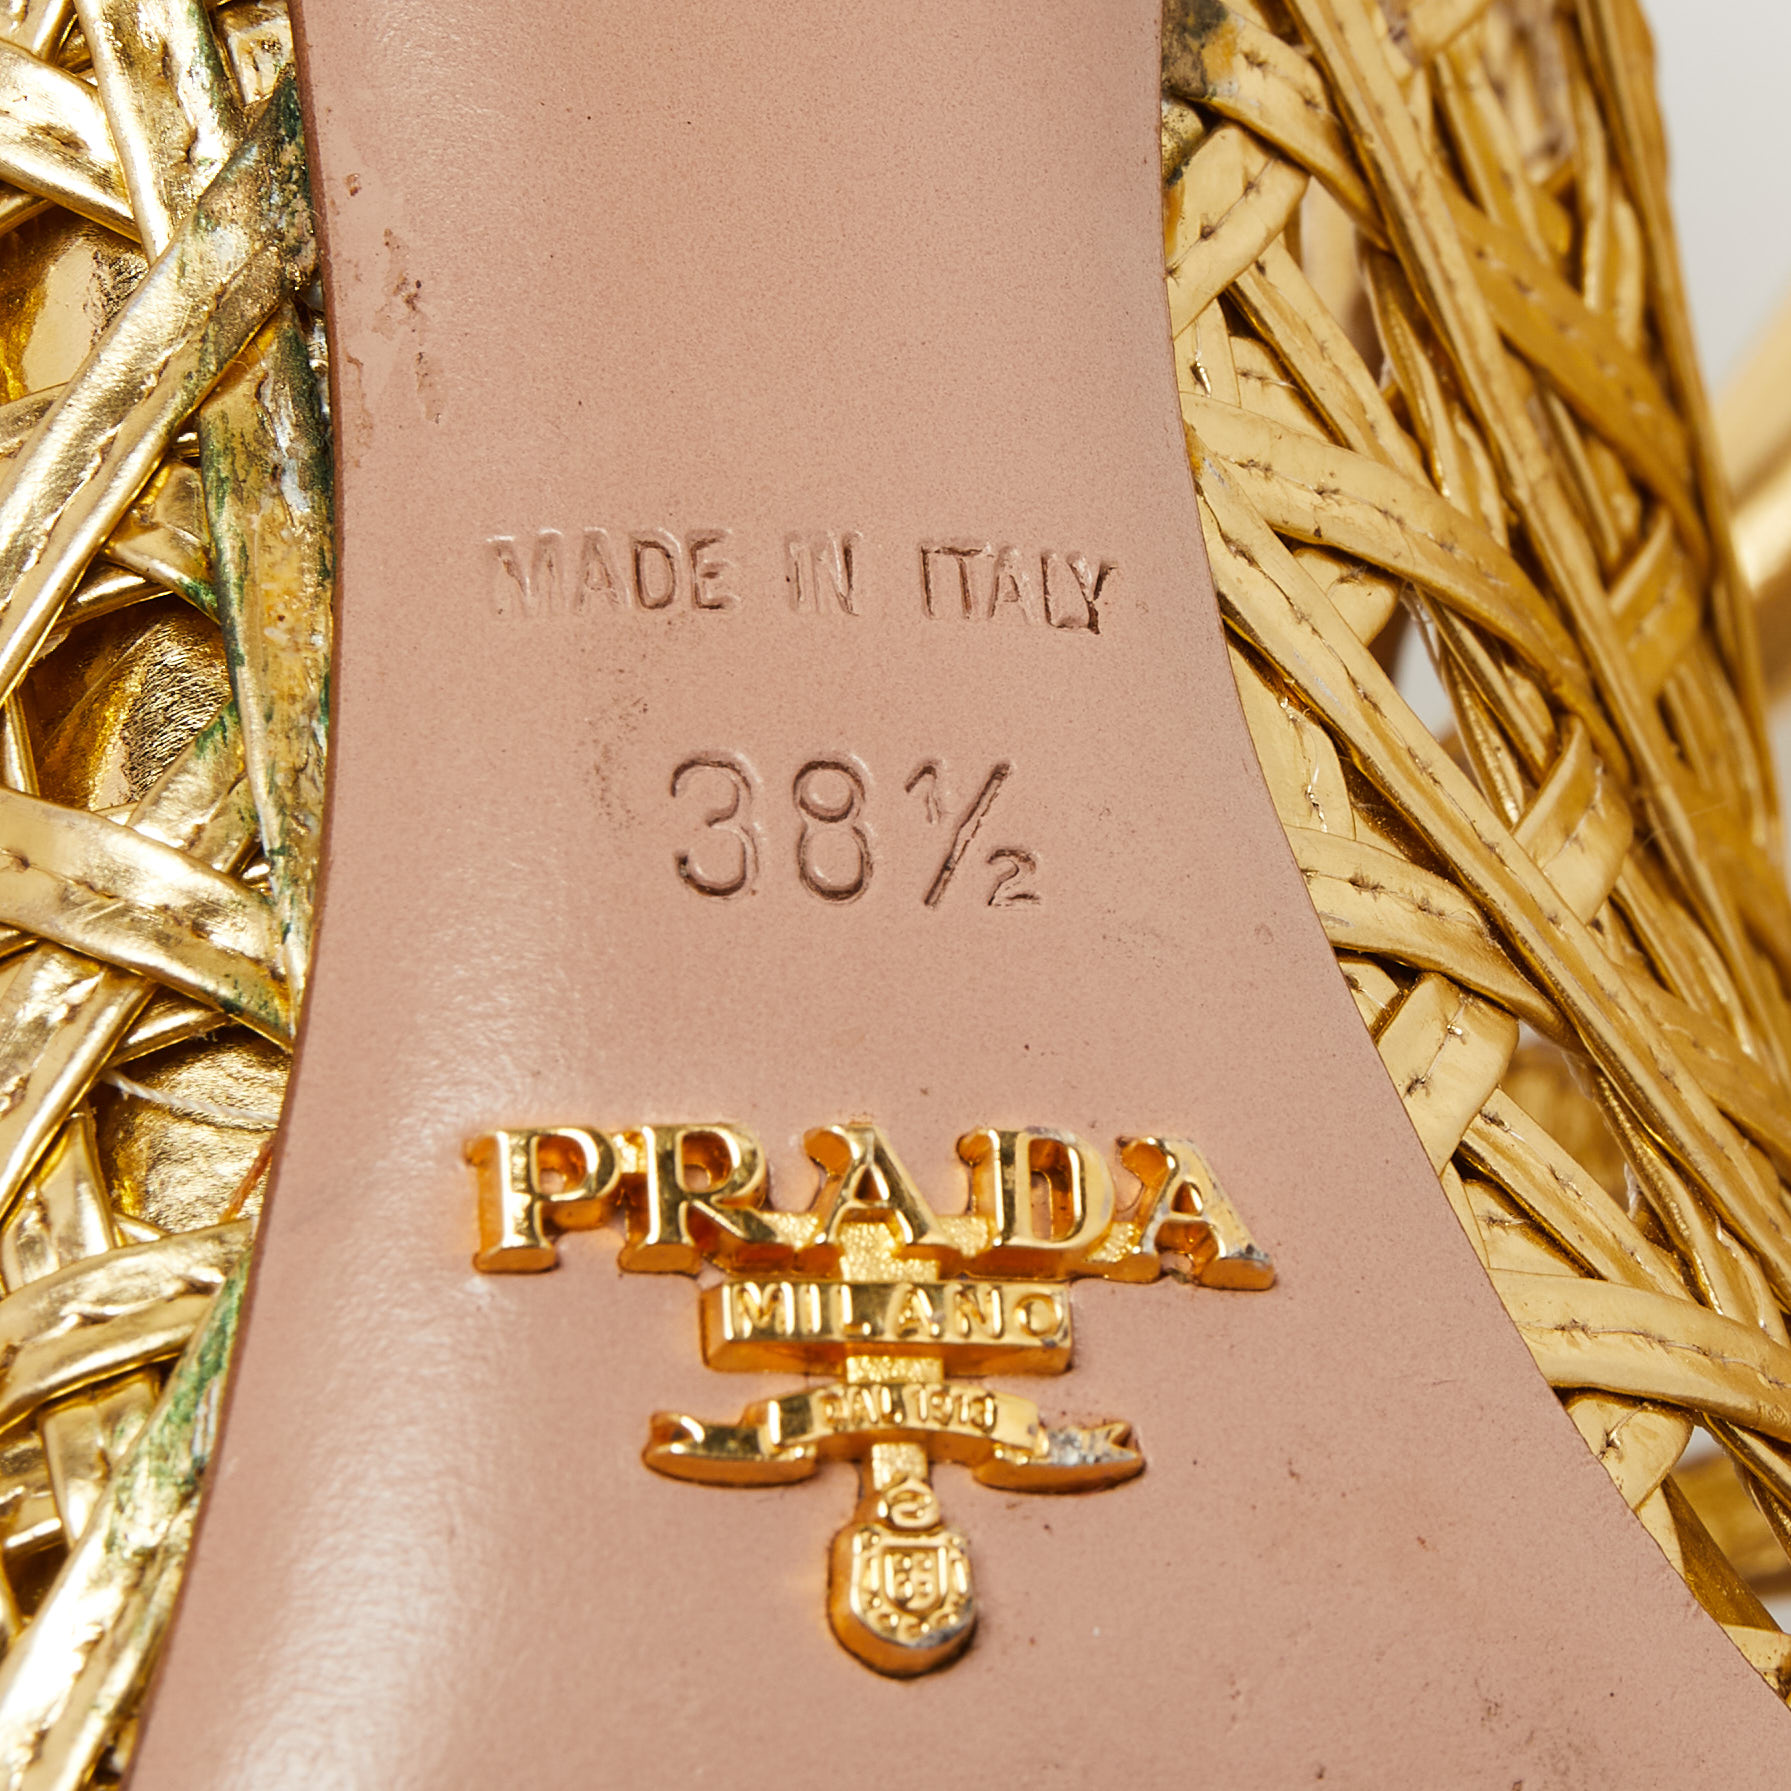 Prada Gold Leather Bow Open Toe Caged Sandals Size 38.5